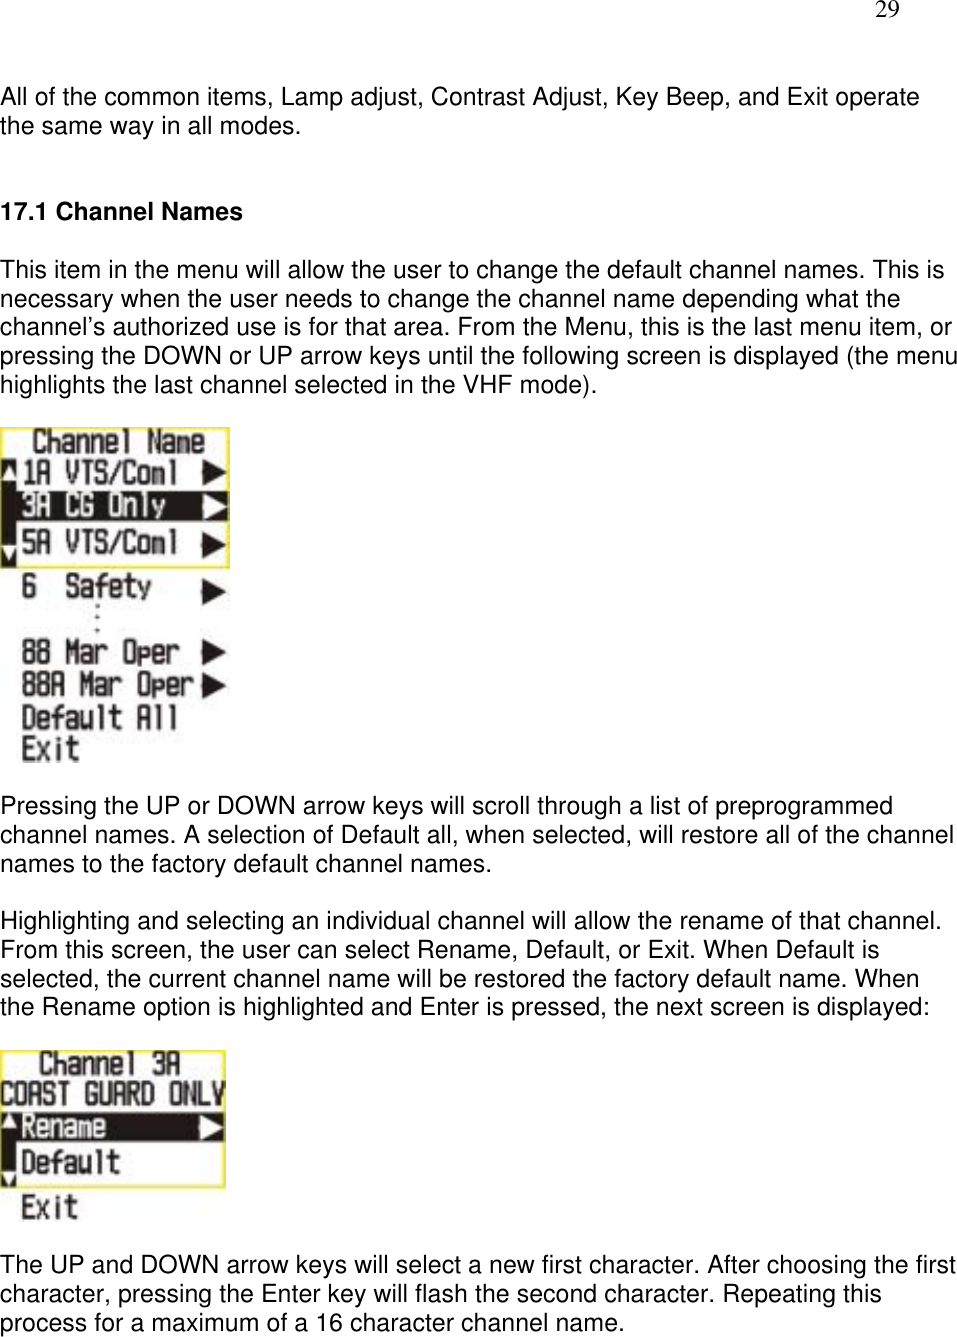   29  All of the common items, Lamp adjust, Contrast Adjust, Key Beep, and Exit operate the same way in all modes.   17.1 Channel Names  This item in the menu will allow the user to change the default channel names. This is necessary when the user needs to change the channel name depending what the channel’s authorized use is for that area. From the Menu, this is the last menu item, or pressing the DOWN or UP arrow keys until the following screen is displayed (the menu highlights the last channel selected in the VHF mode).    Pressing the UP or DOWN arrow keys will scroll through a list of preprogrammed channel names. A selection of Default all, when selected, will restore all of the channel names to the factory default channel names.   Highlighting and selecting an individual channel will allow the rename of that channel. From this screen, the user can select Rename, Default, or Exit. When Default is selected, the current channel name will be restored the factory default name. When the Rename option is highlighted and Enter is pressed, the next screen is displayed:    The UP and DOWN arrow keys will select a new first character. After choosing the first character, pressing the Enter key will flash the second character. Repeating this process for a maximum of a 16 character channel name.  